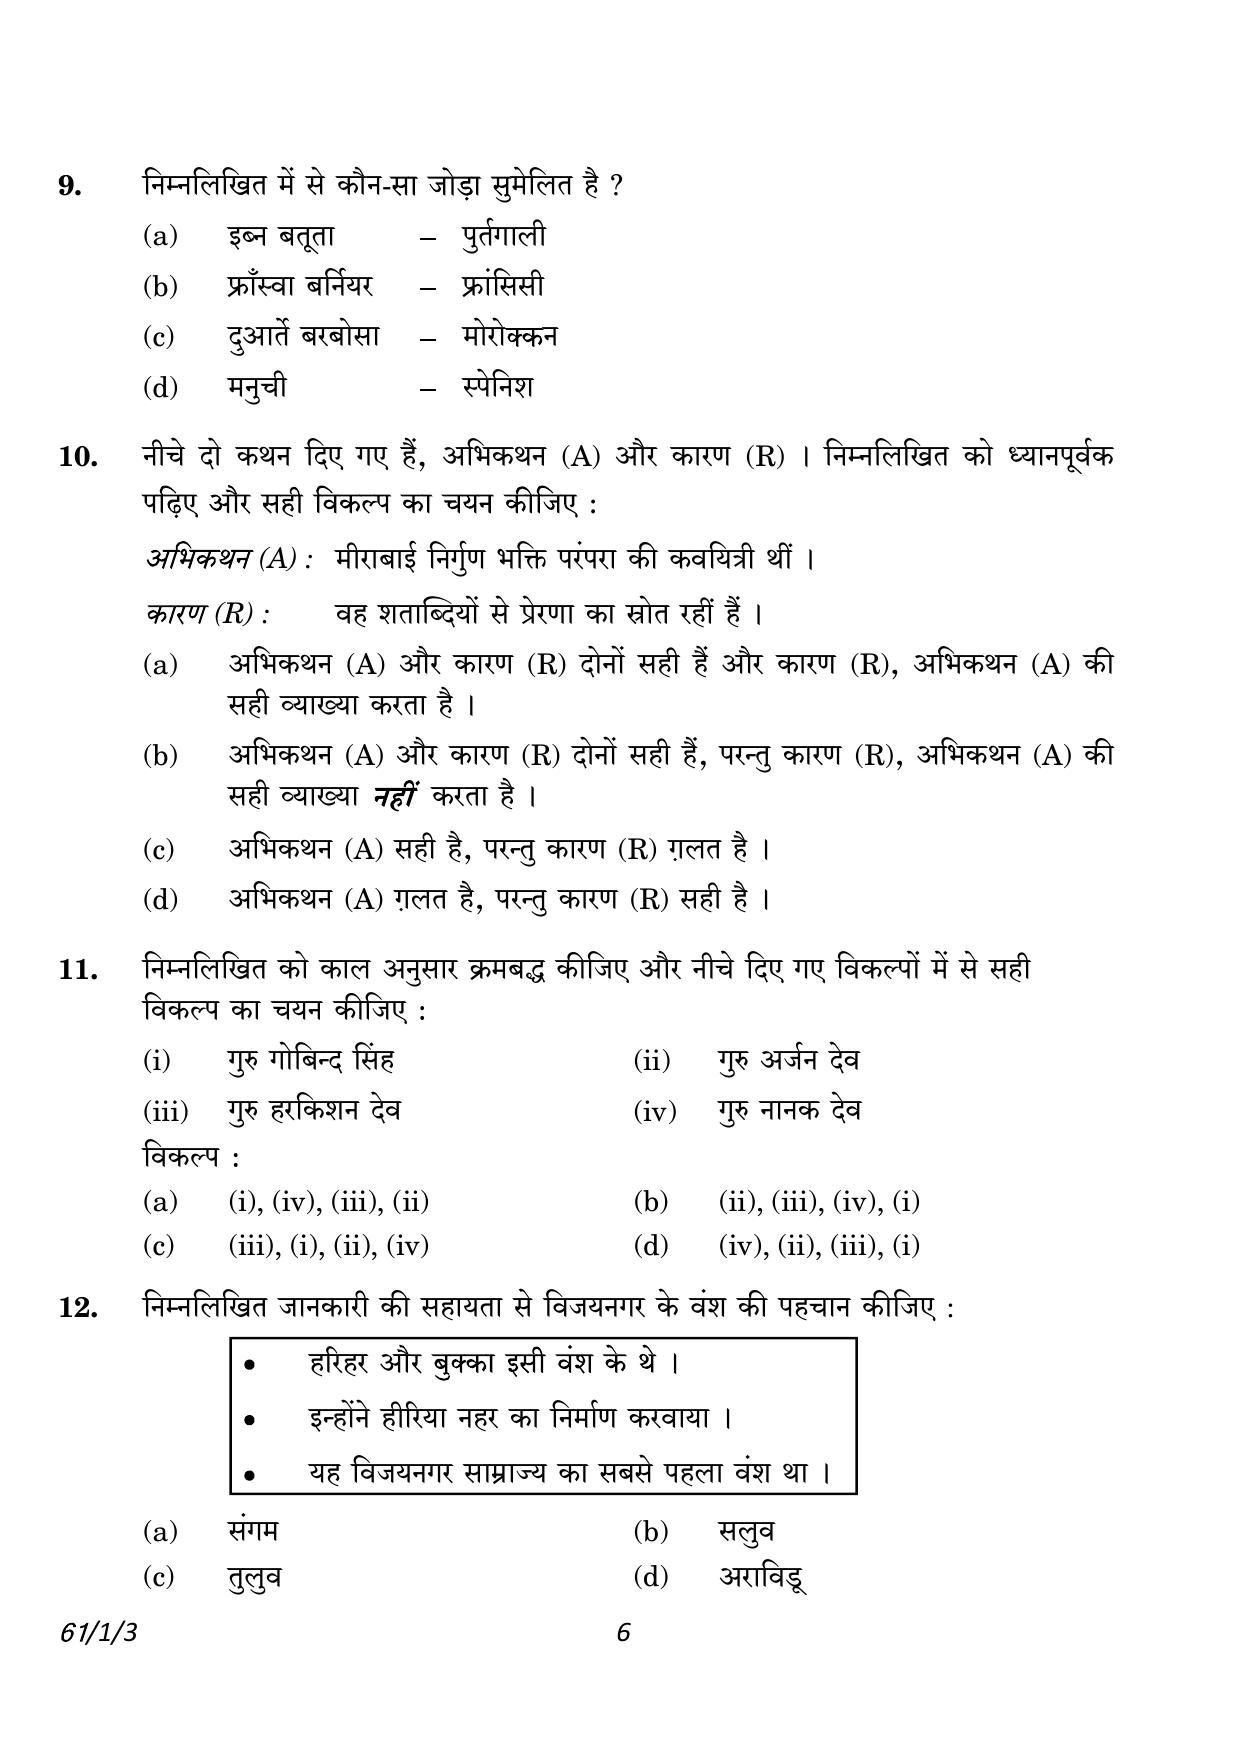 CBSE Class 12 61-1-3 History 2023 Question Paper - Page 6